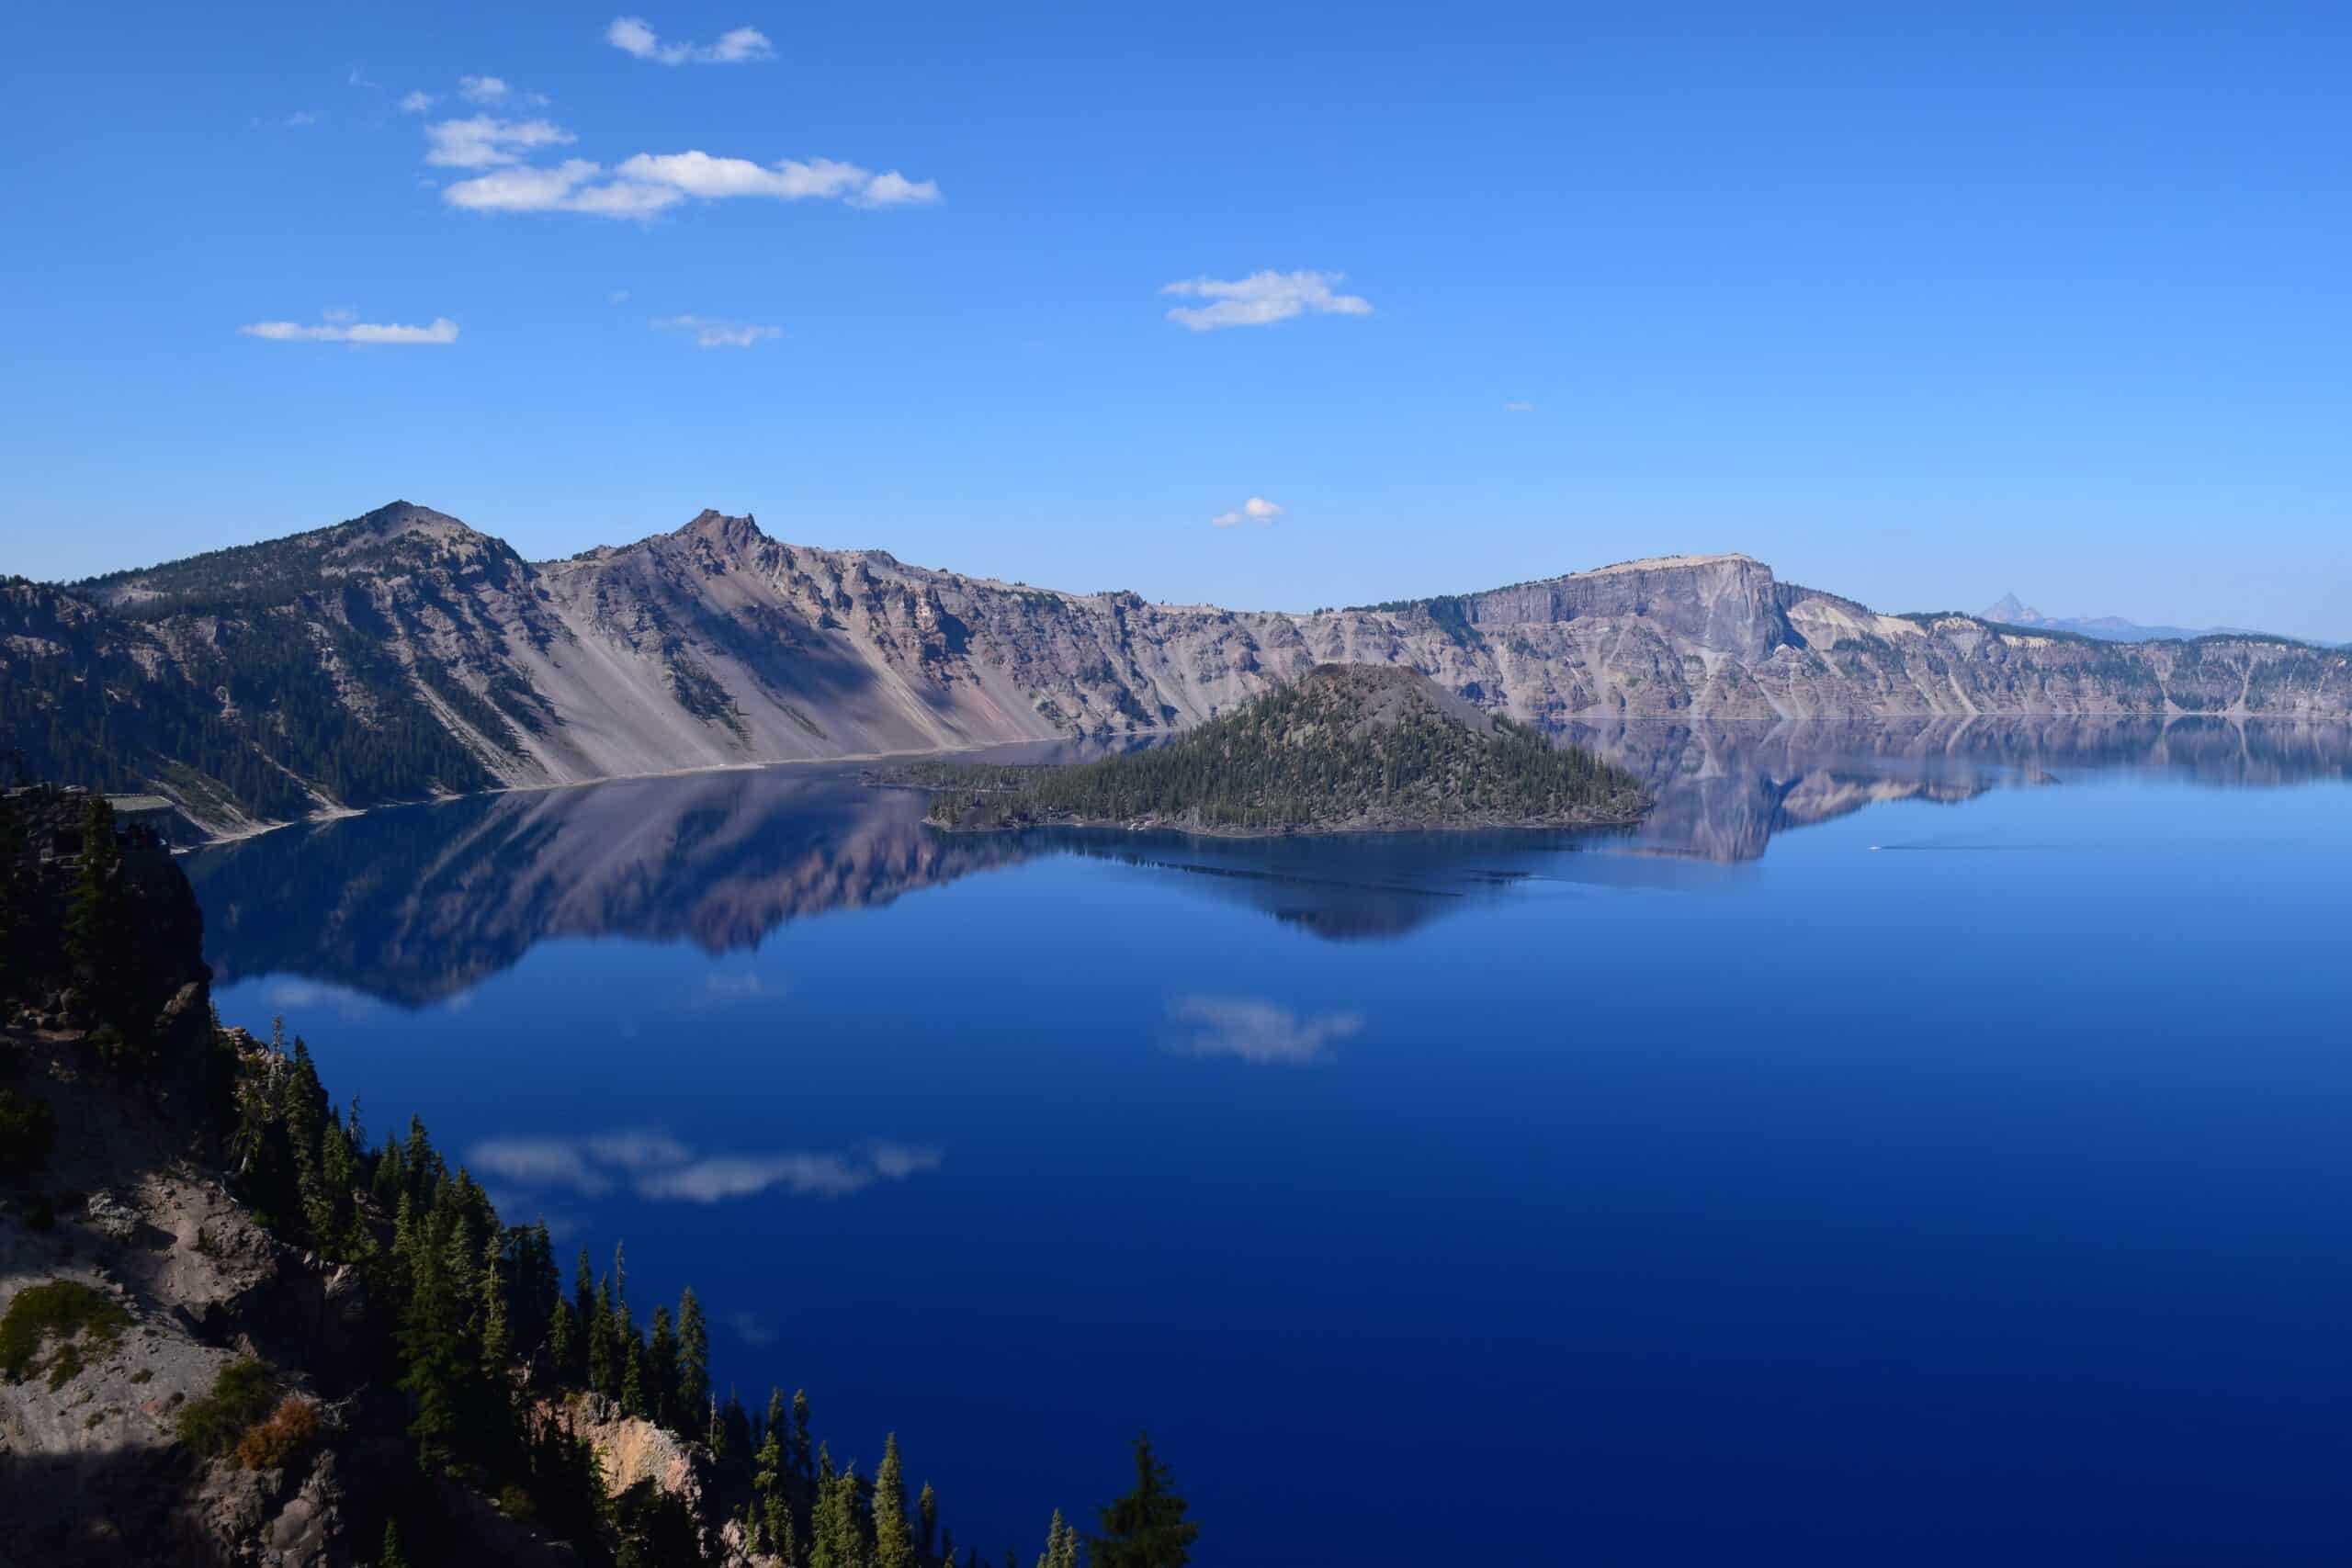 Crater Lake is one of the deepest lakes in the U.S. and the perfect detour for a Los Angeles to Seattle road trip.